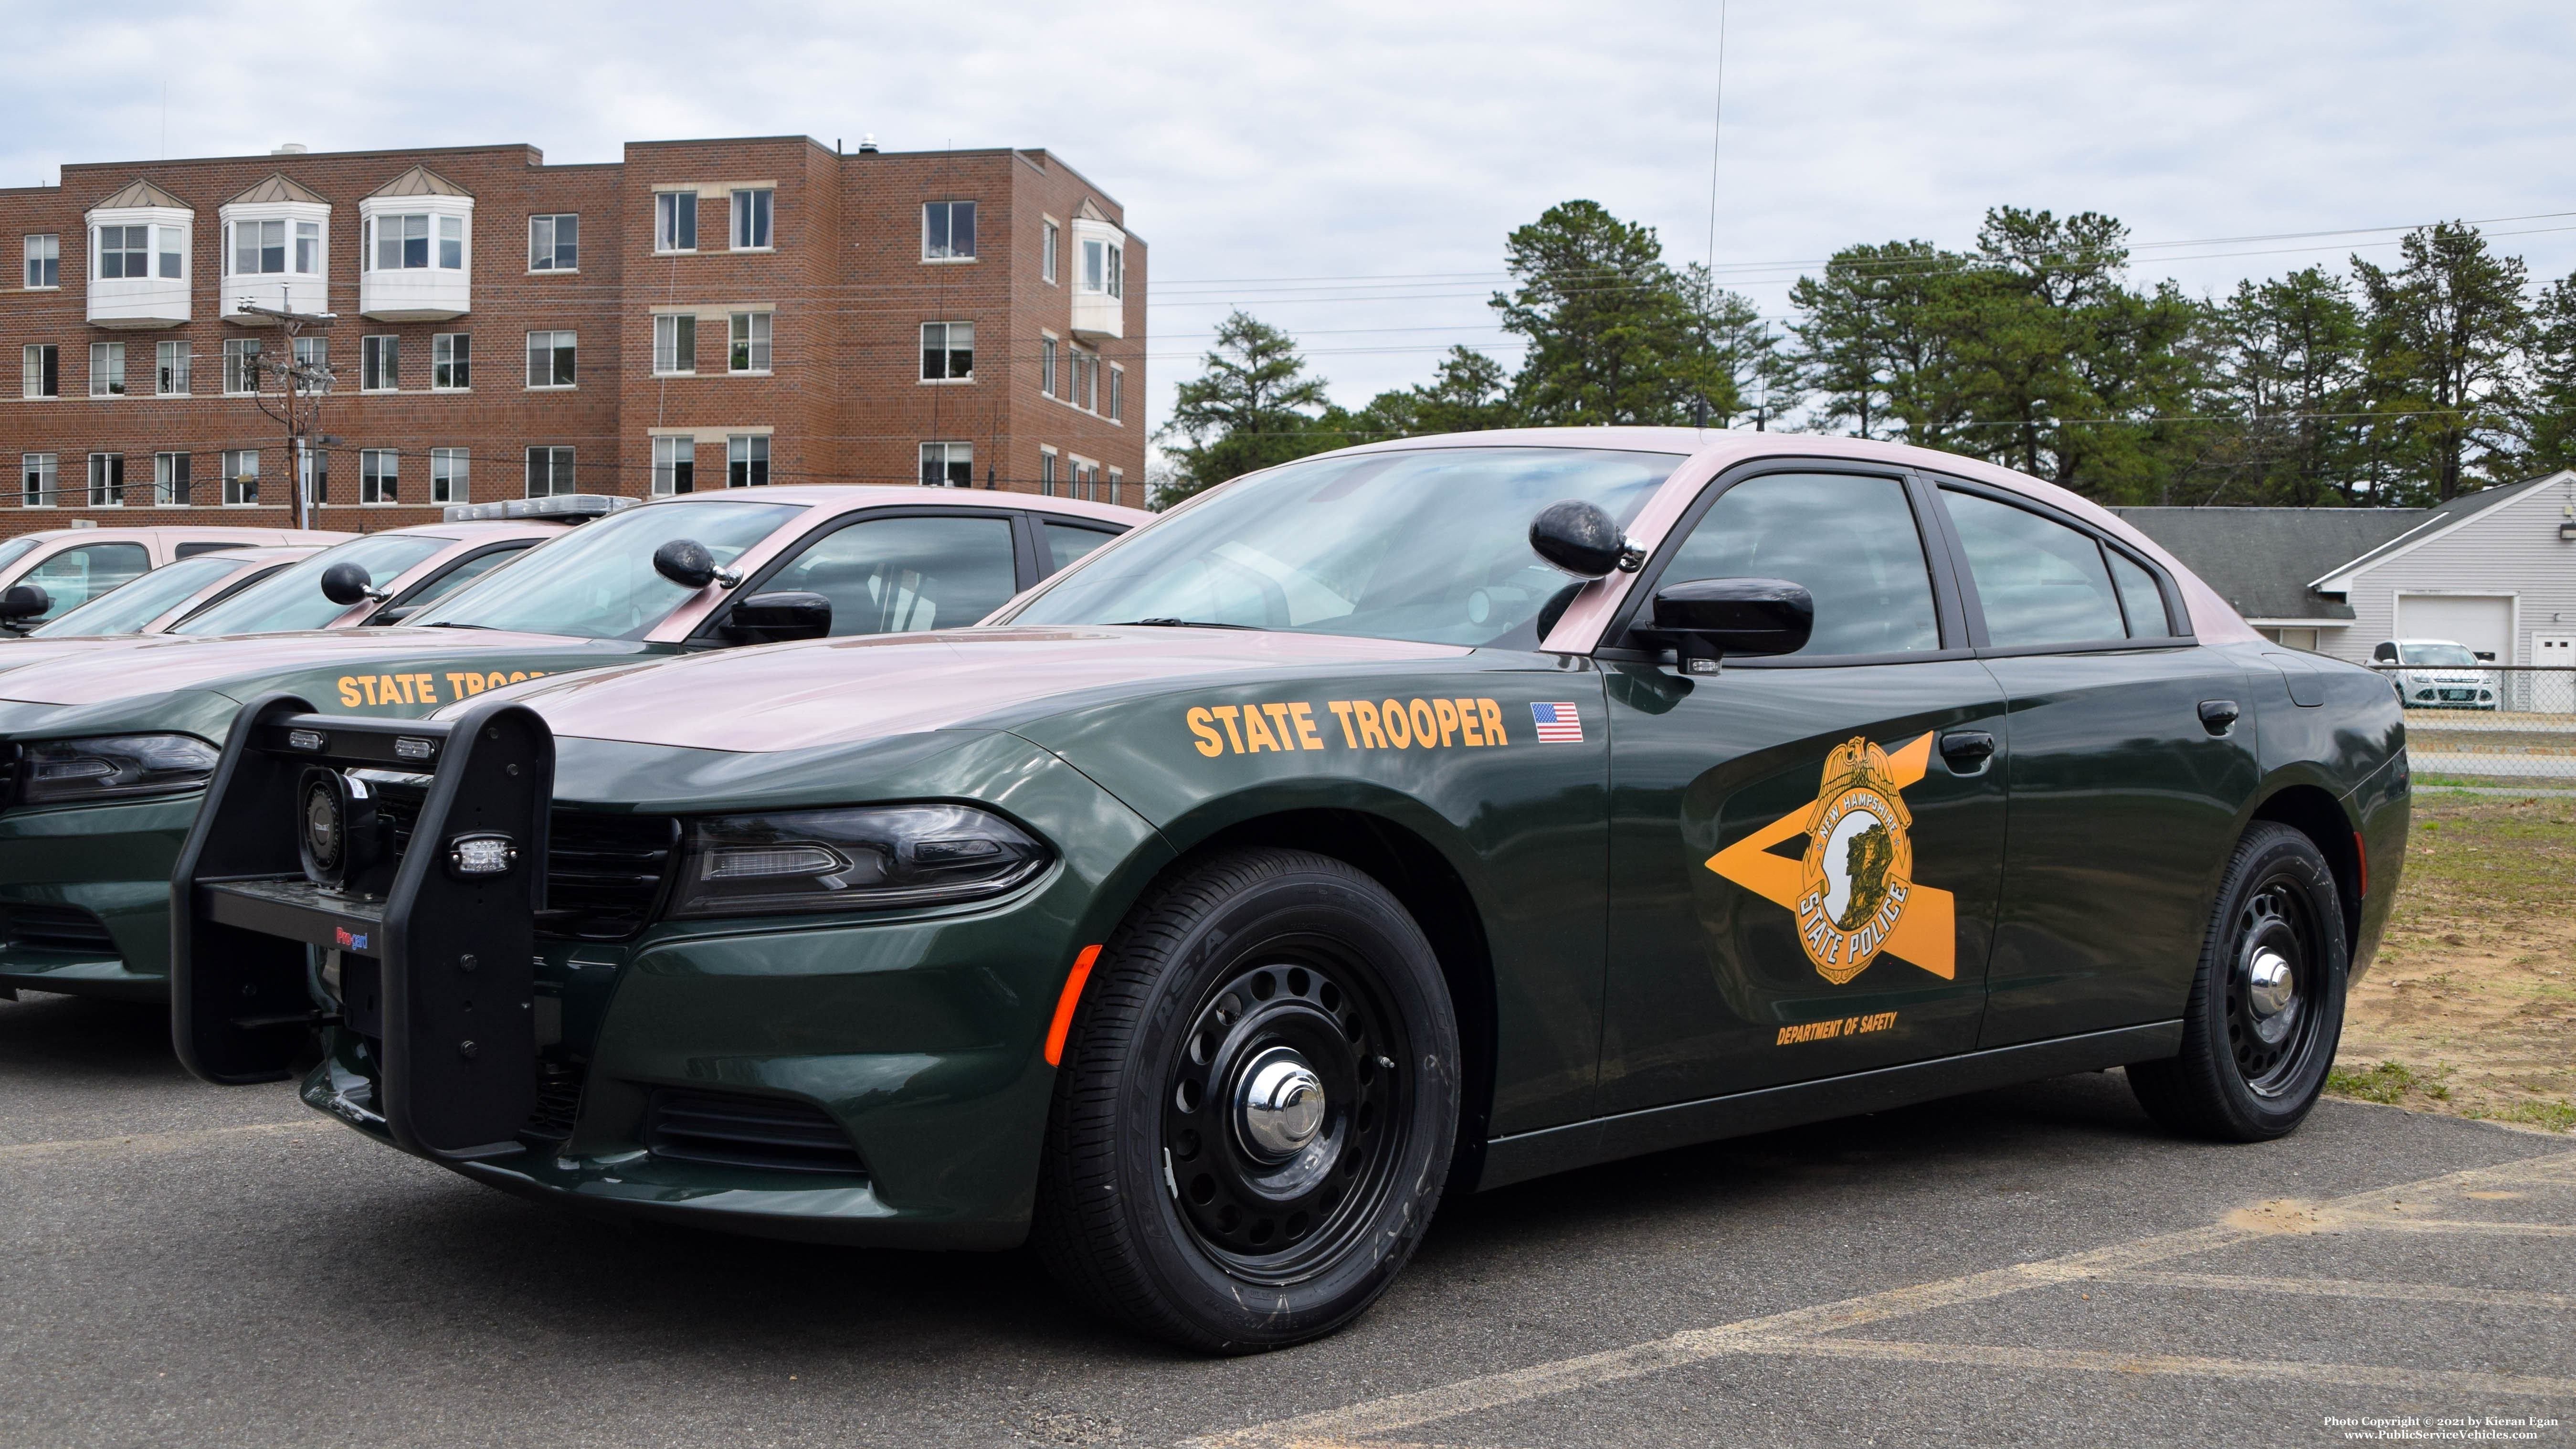 A photo  of New Hampshire State Police
            Cruiser 410, a 2020 Dodge Charger             taken by Kieran Egan